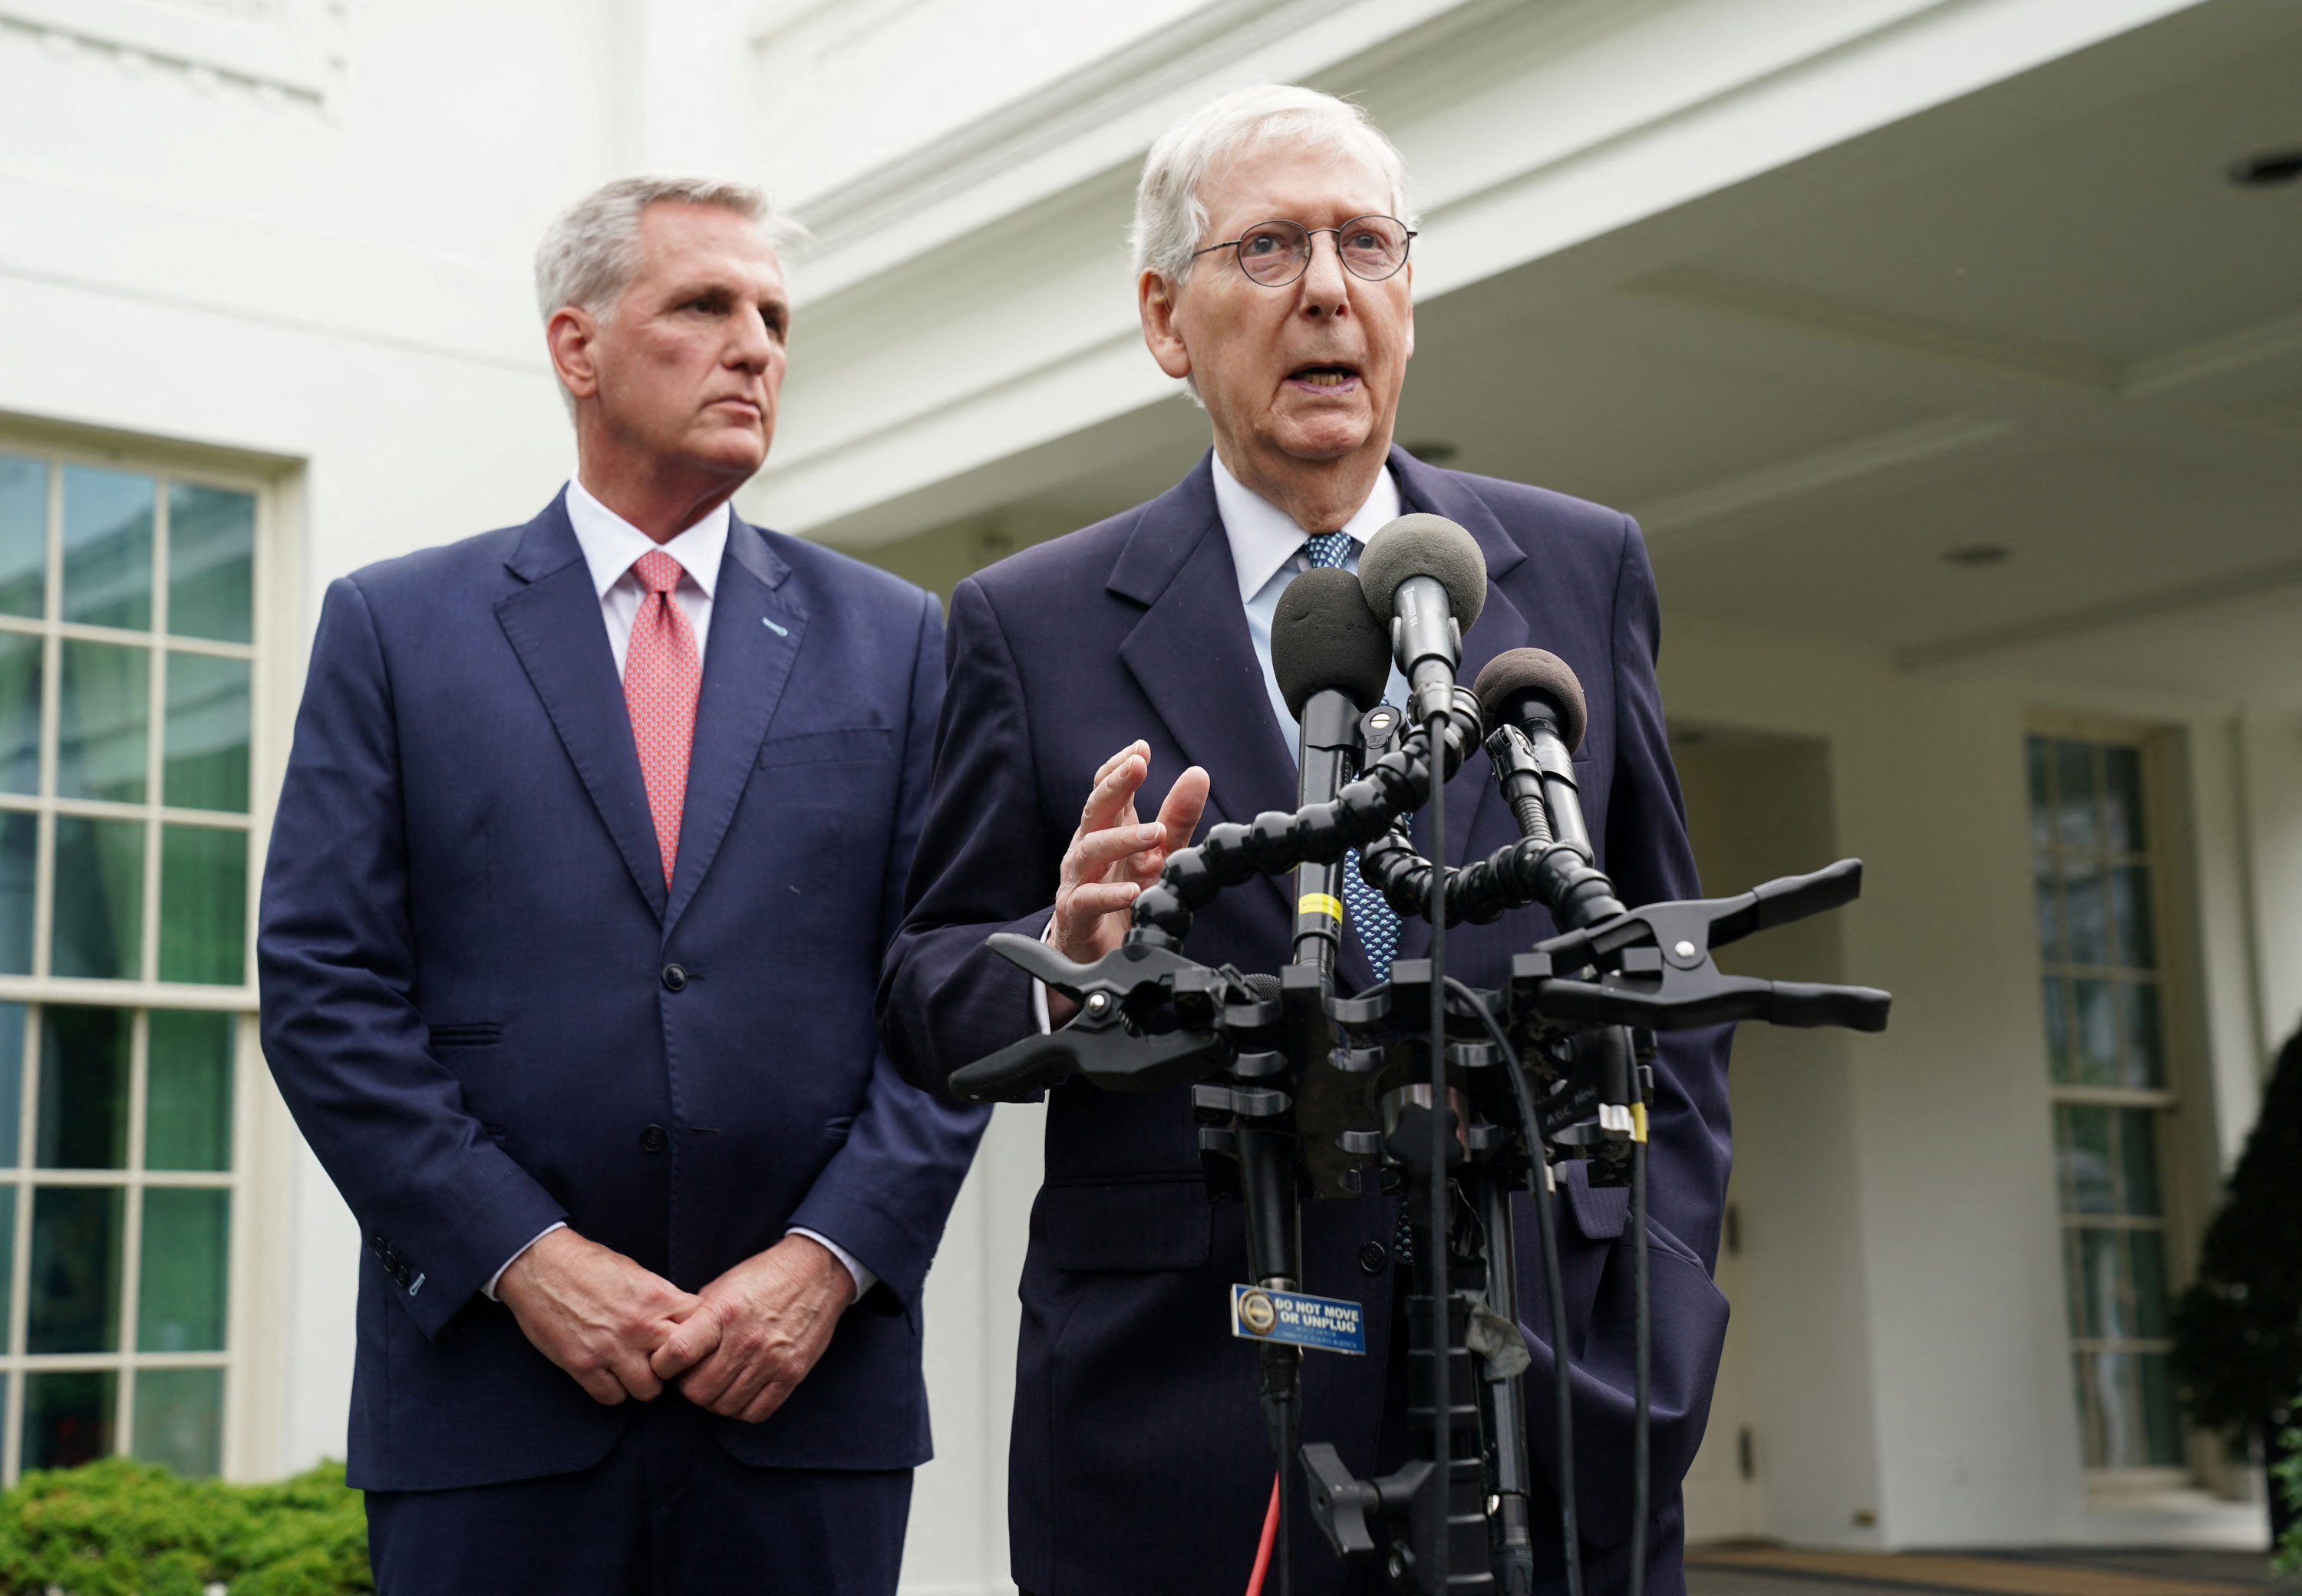 Senate Minority Leader Mitch McConnell (R-KY) and House Speaker Kevin McCarthy (R-CA) speak to reporters outside the West Wing following debt limit talks with President Joe Biden and Congressional leaders at the White House in Washington, D.C. on May 16, 2023.